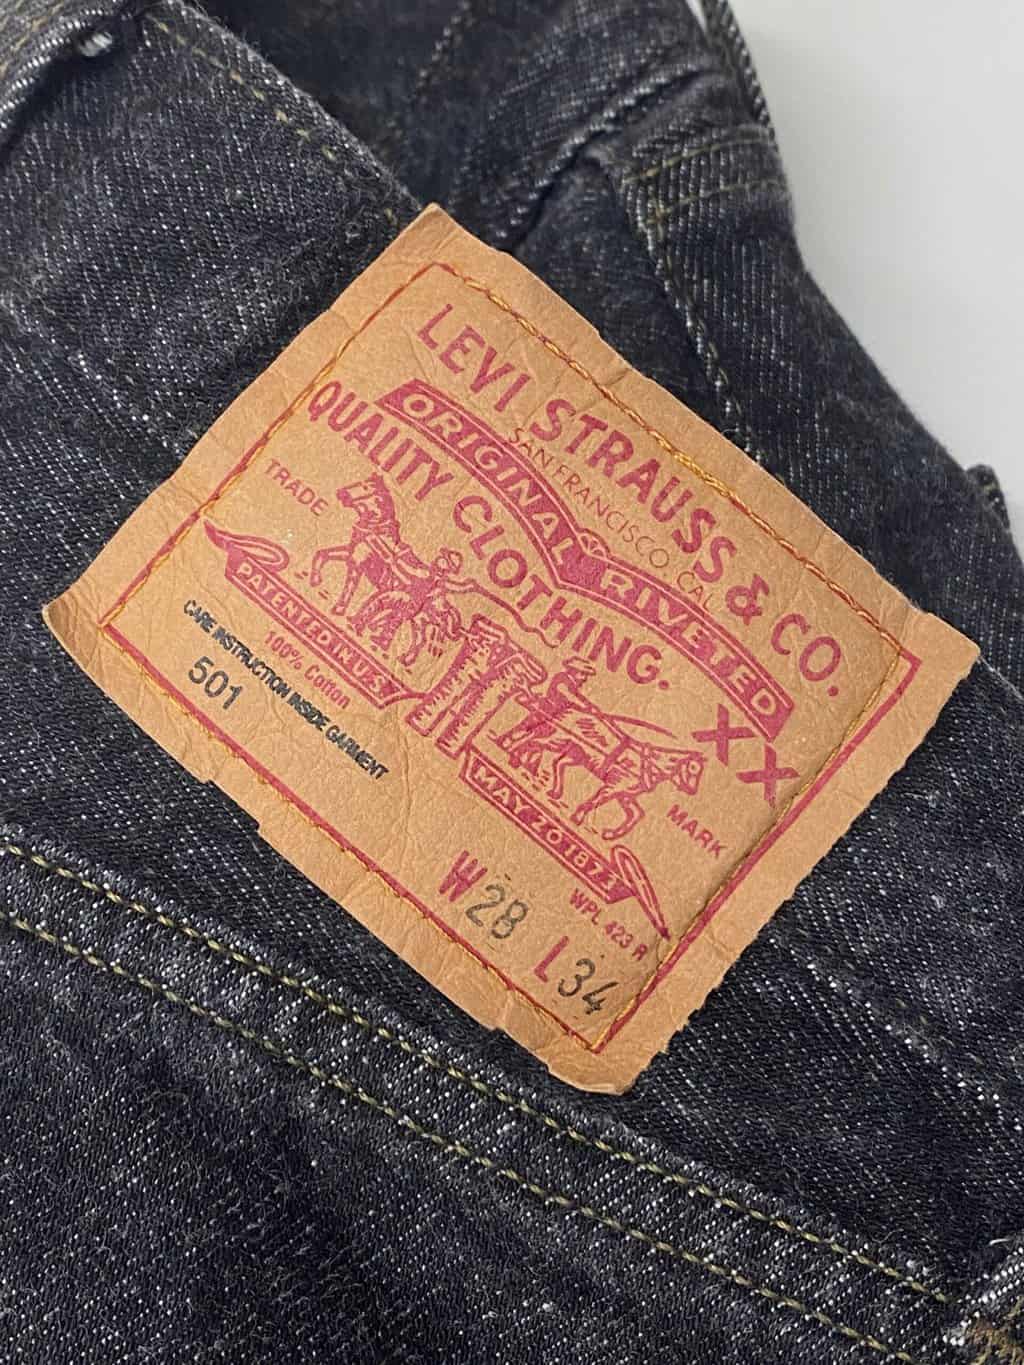 90s vintage Levis 501 jeans USA made black grey with red tab - W27 x L32 -  St Cyr Vintage